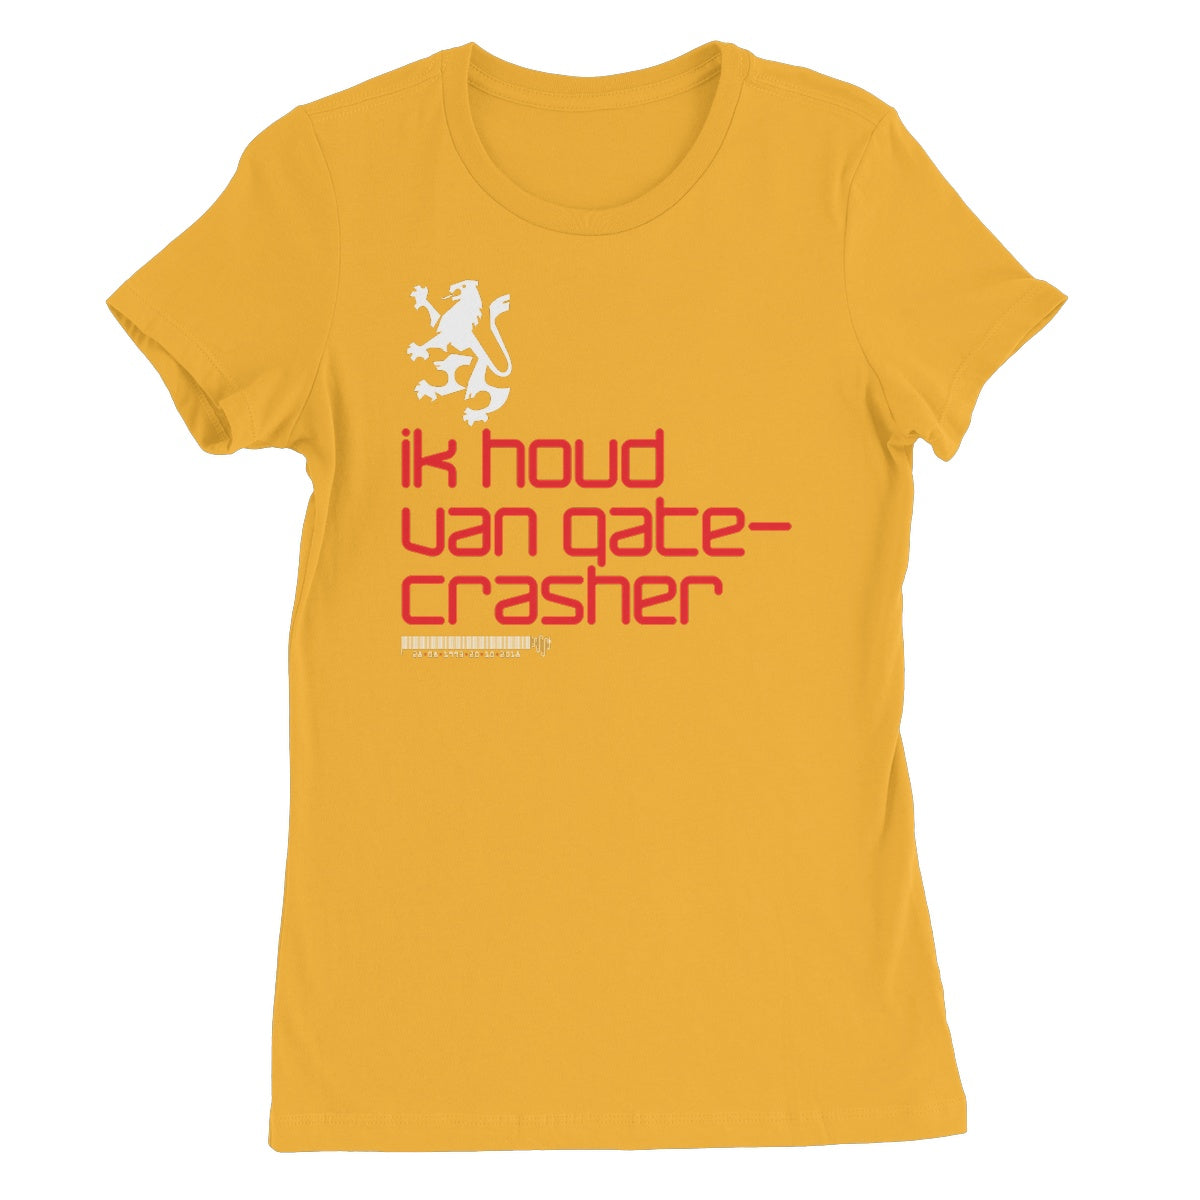 One for the Crazy Dutch Guys Womens Favourite T-Shirt